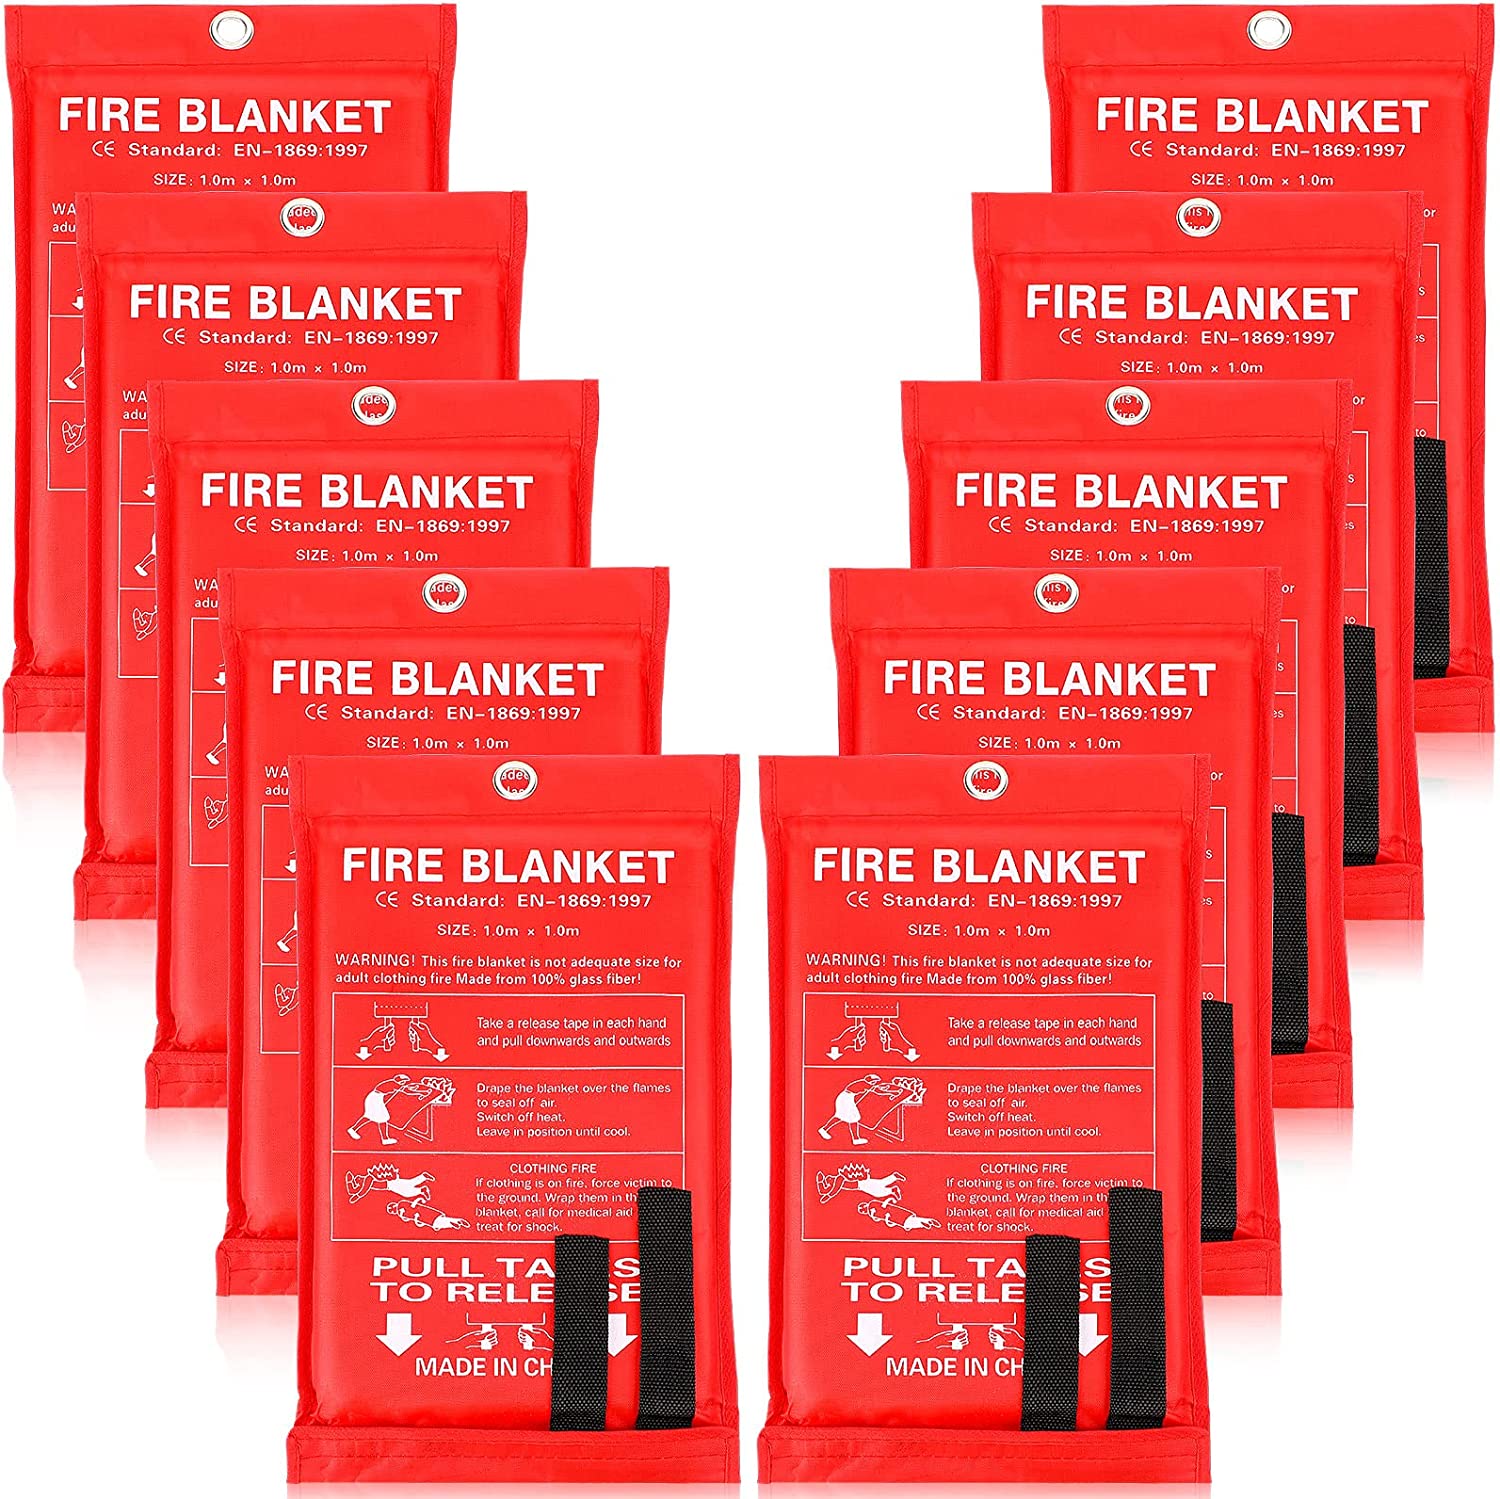 10 Pack Fire Blanket Fiberglass Fire Emergency Blanket Flame Retardant Fire Suppression Blanket Fireproof Emergency Survival Safety Cover for Kitchen Home Car Office Warehouse Camping, 39 x 39 Inch